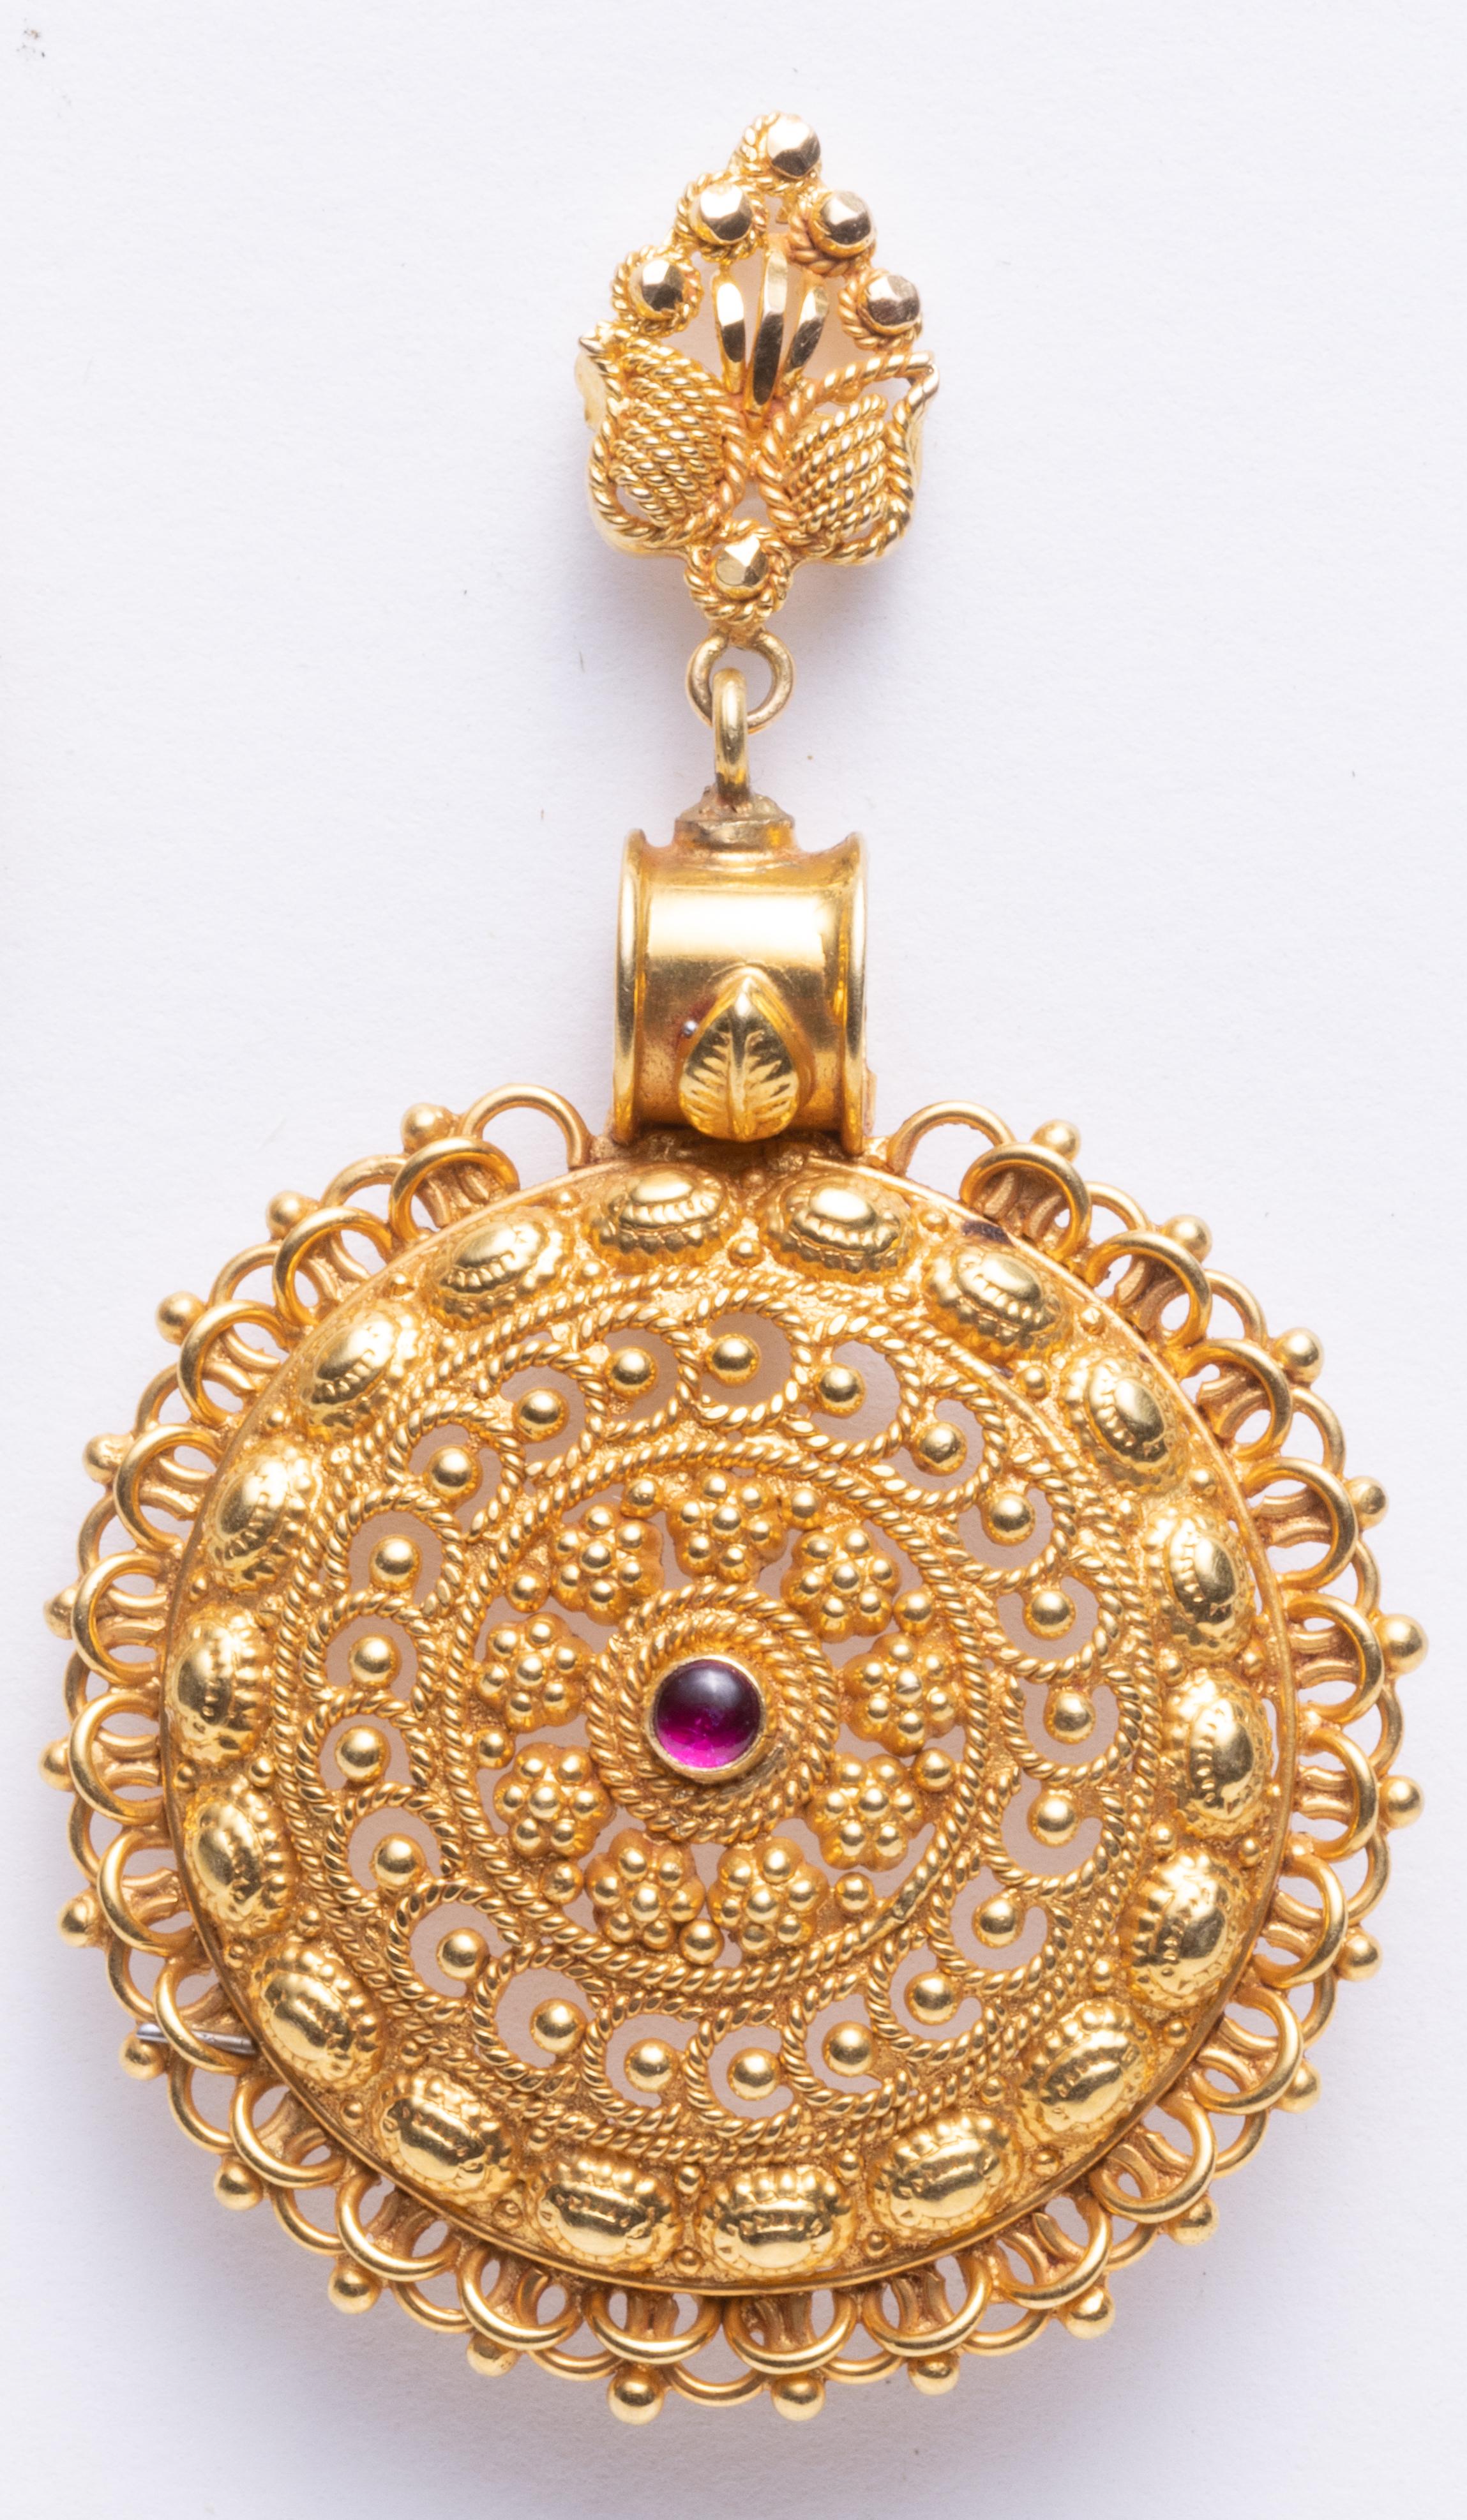 Lovely and rare 22K gold medallion earrings with highly intricate granulation and wire work.  A cabochon ruby center.  These were originally Indian necklace pendants and the top posts have been added to convert them to earrings which also features